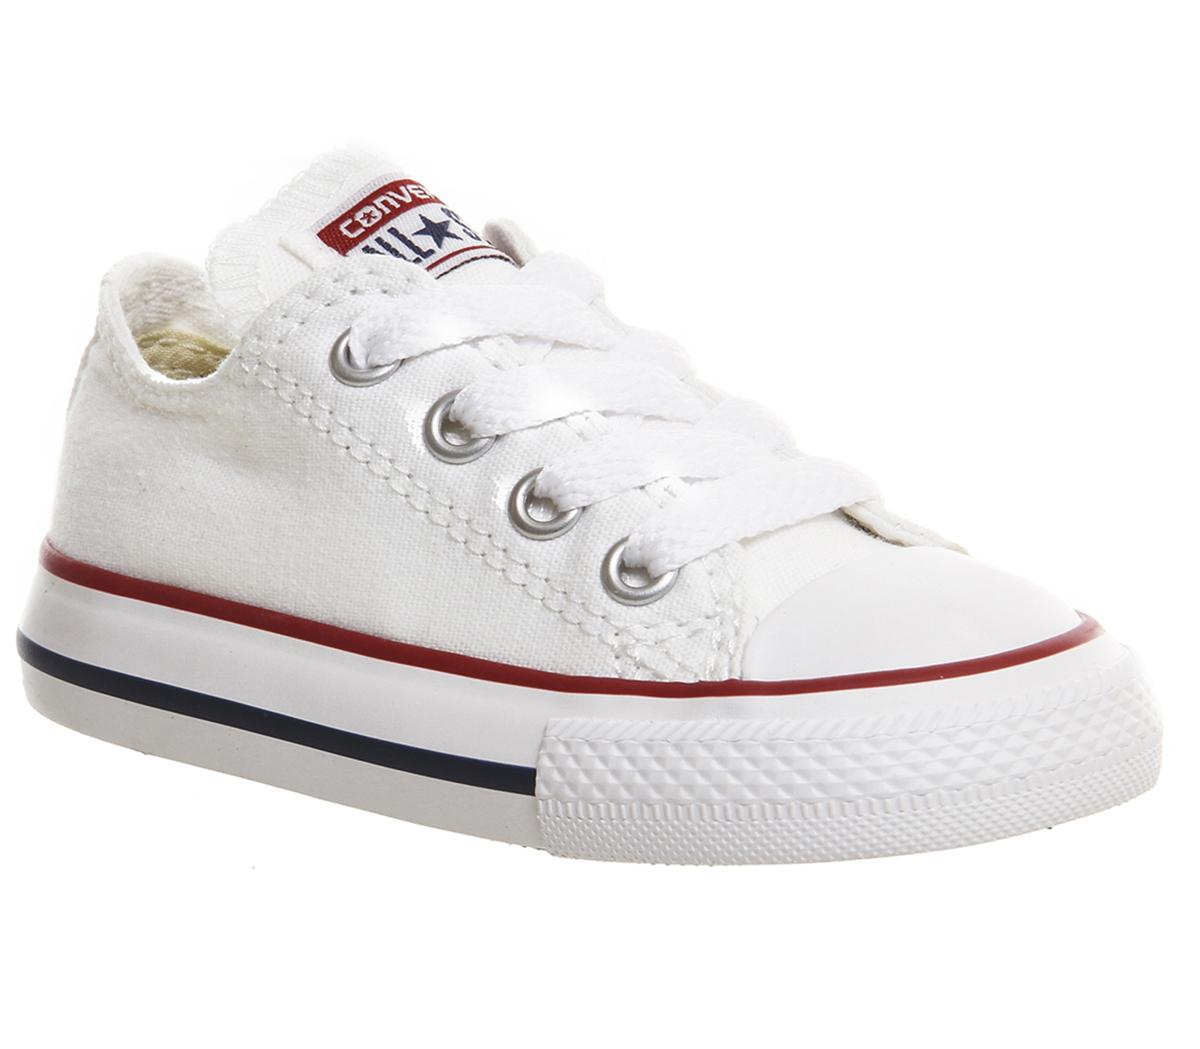 Star Low Infant Shoes White - Unisex